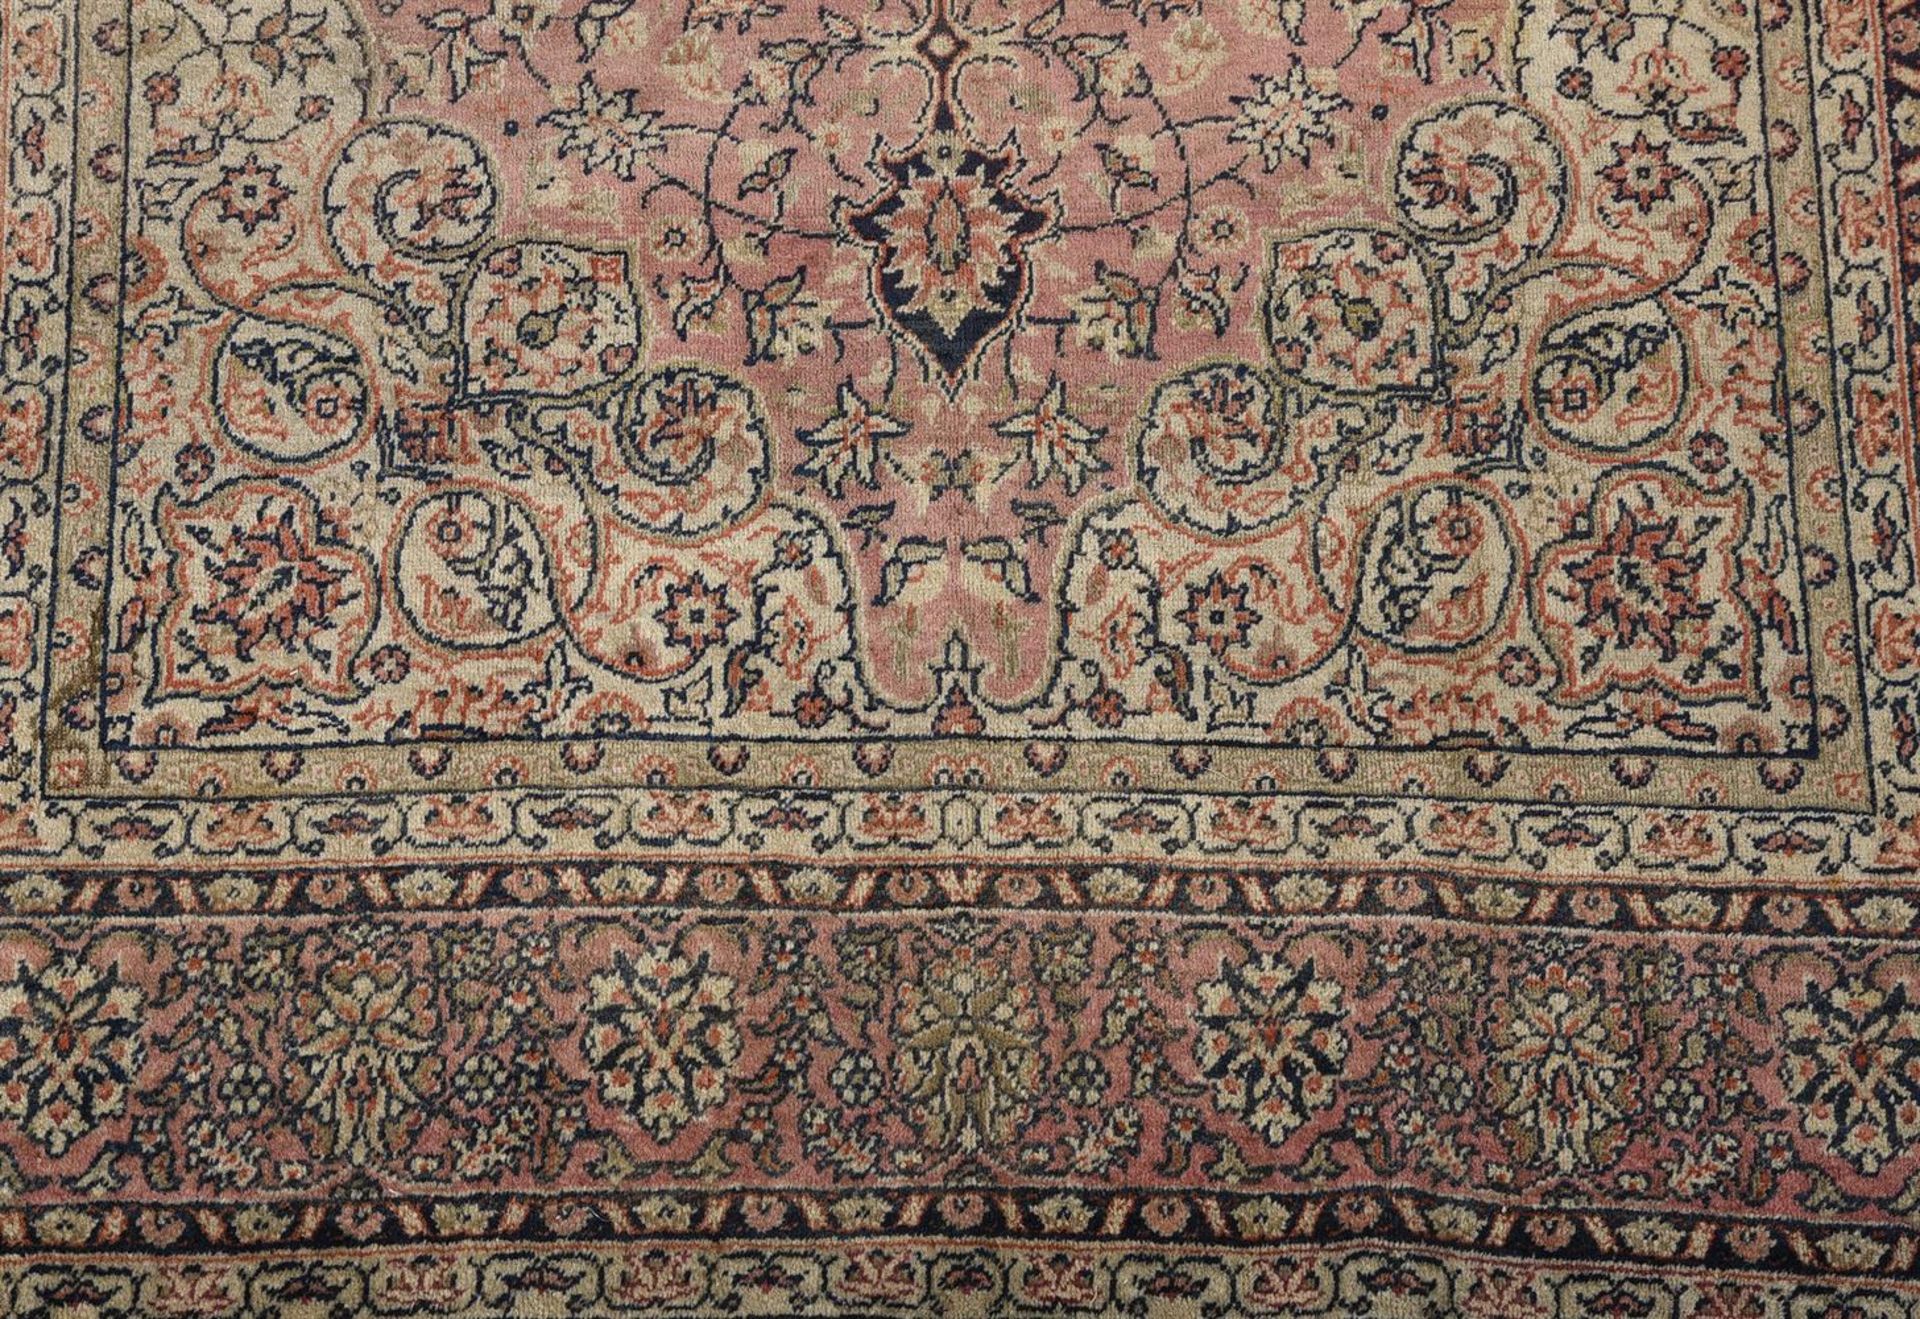 A TABRIZ RUG IN AUBUSSON STYLE - Image 3 of 3